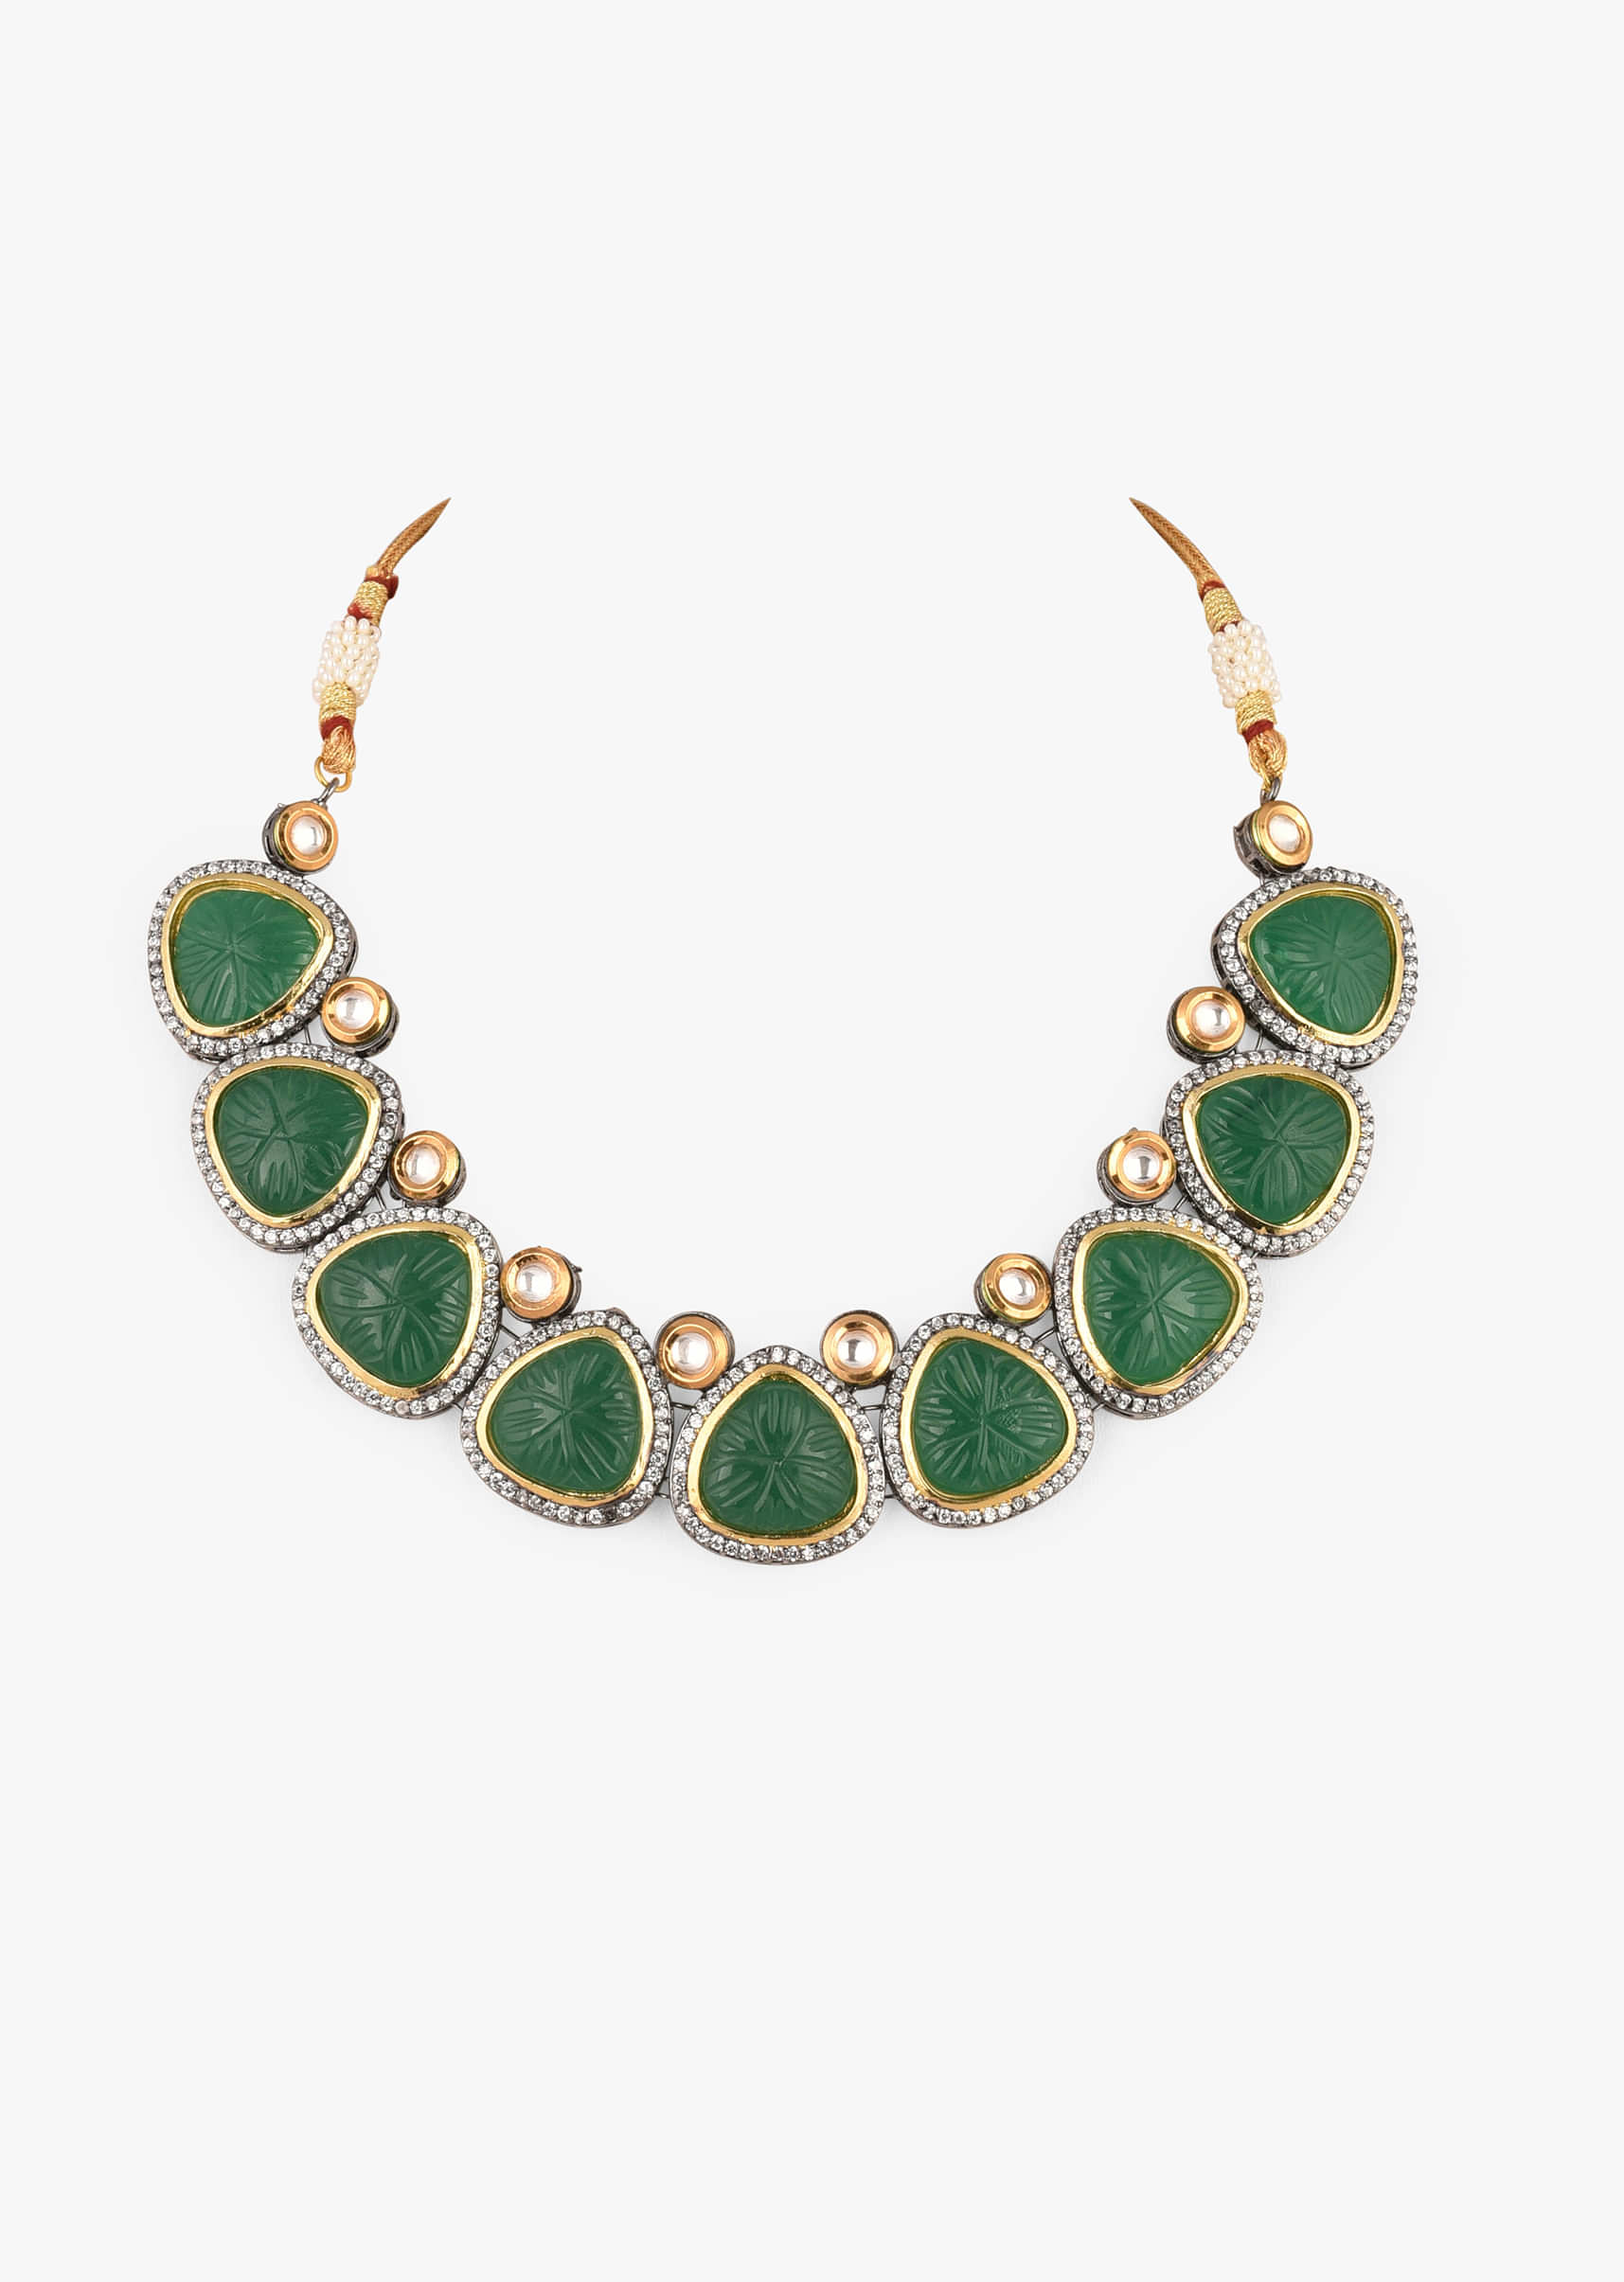 Carved Green Stone Necklace Set Edged In Swarovski With Matching Stud Earrings And Mangtika 